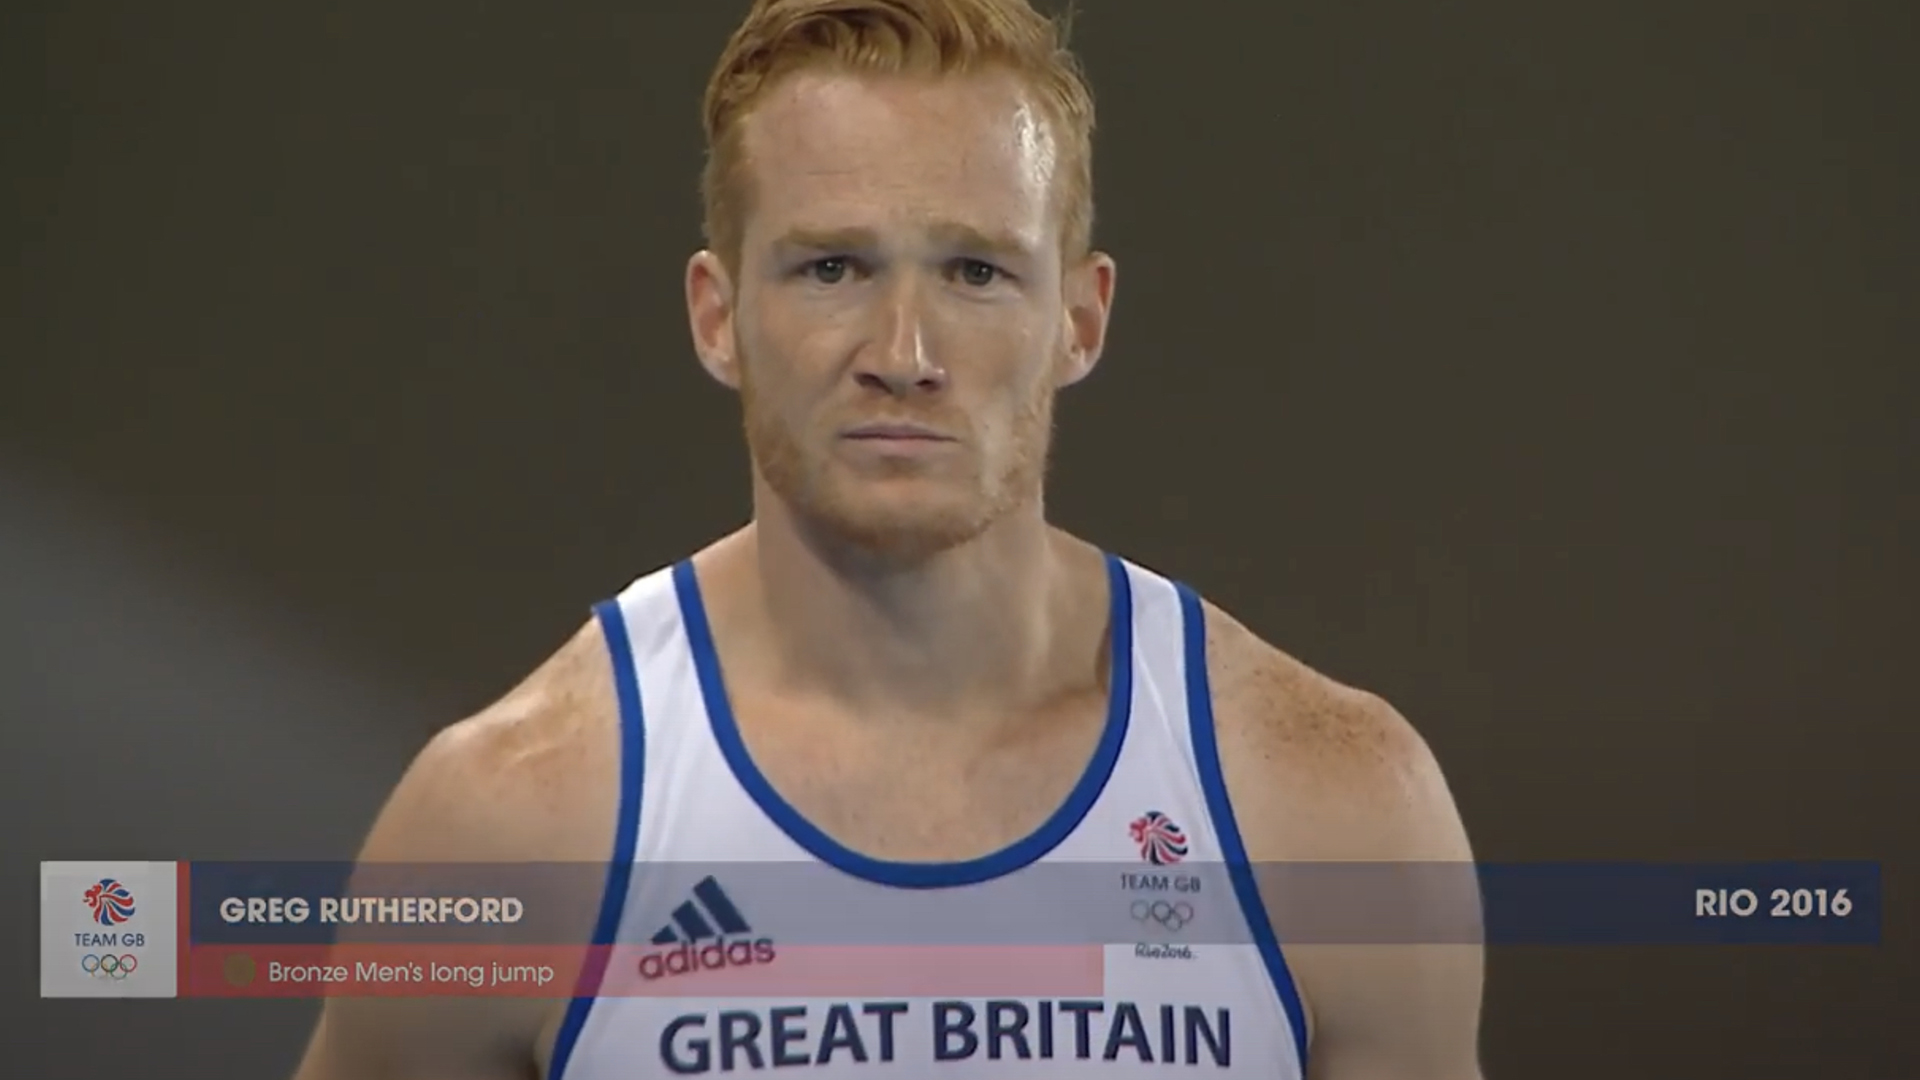 Greg Rutherford at the Rio Olympics